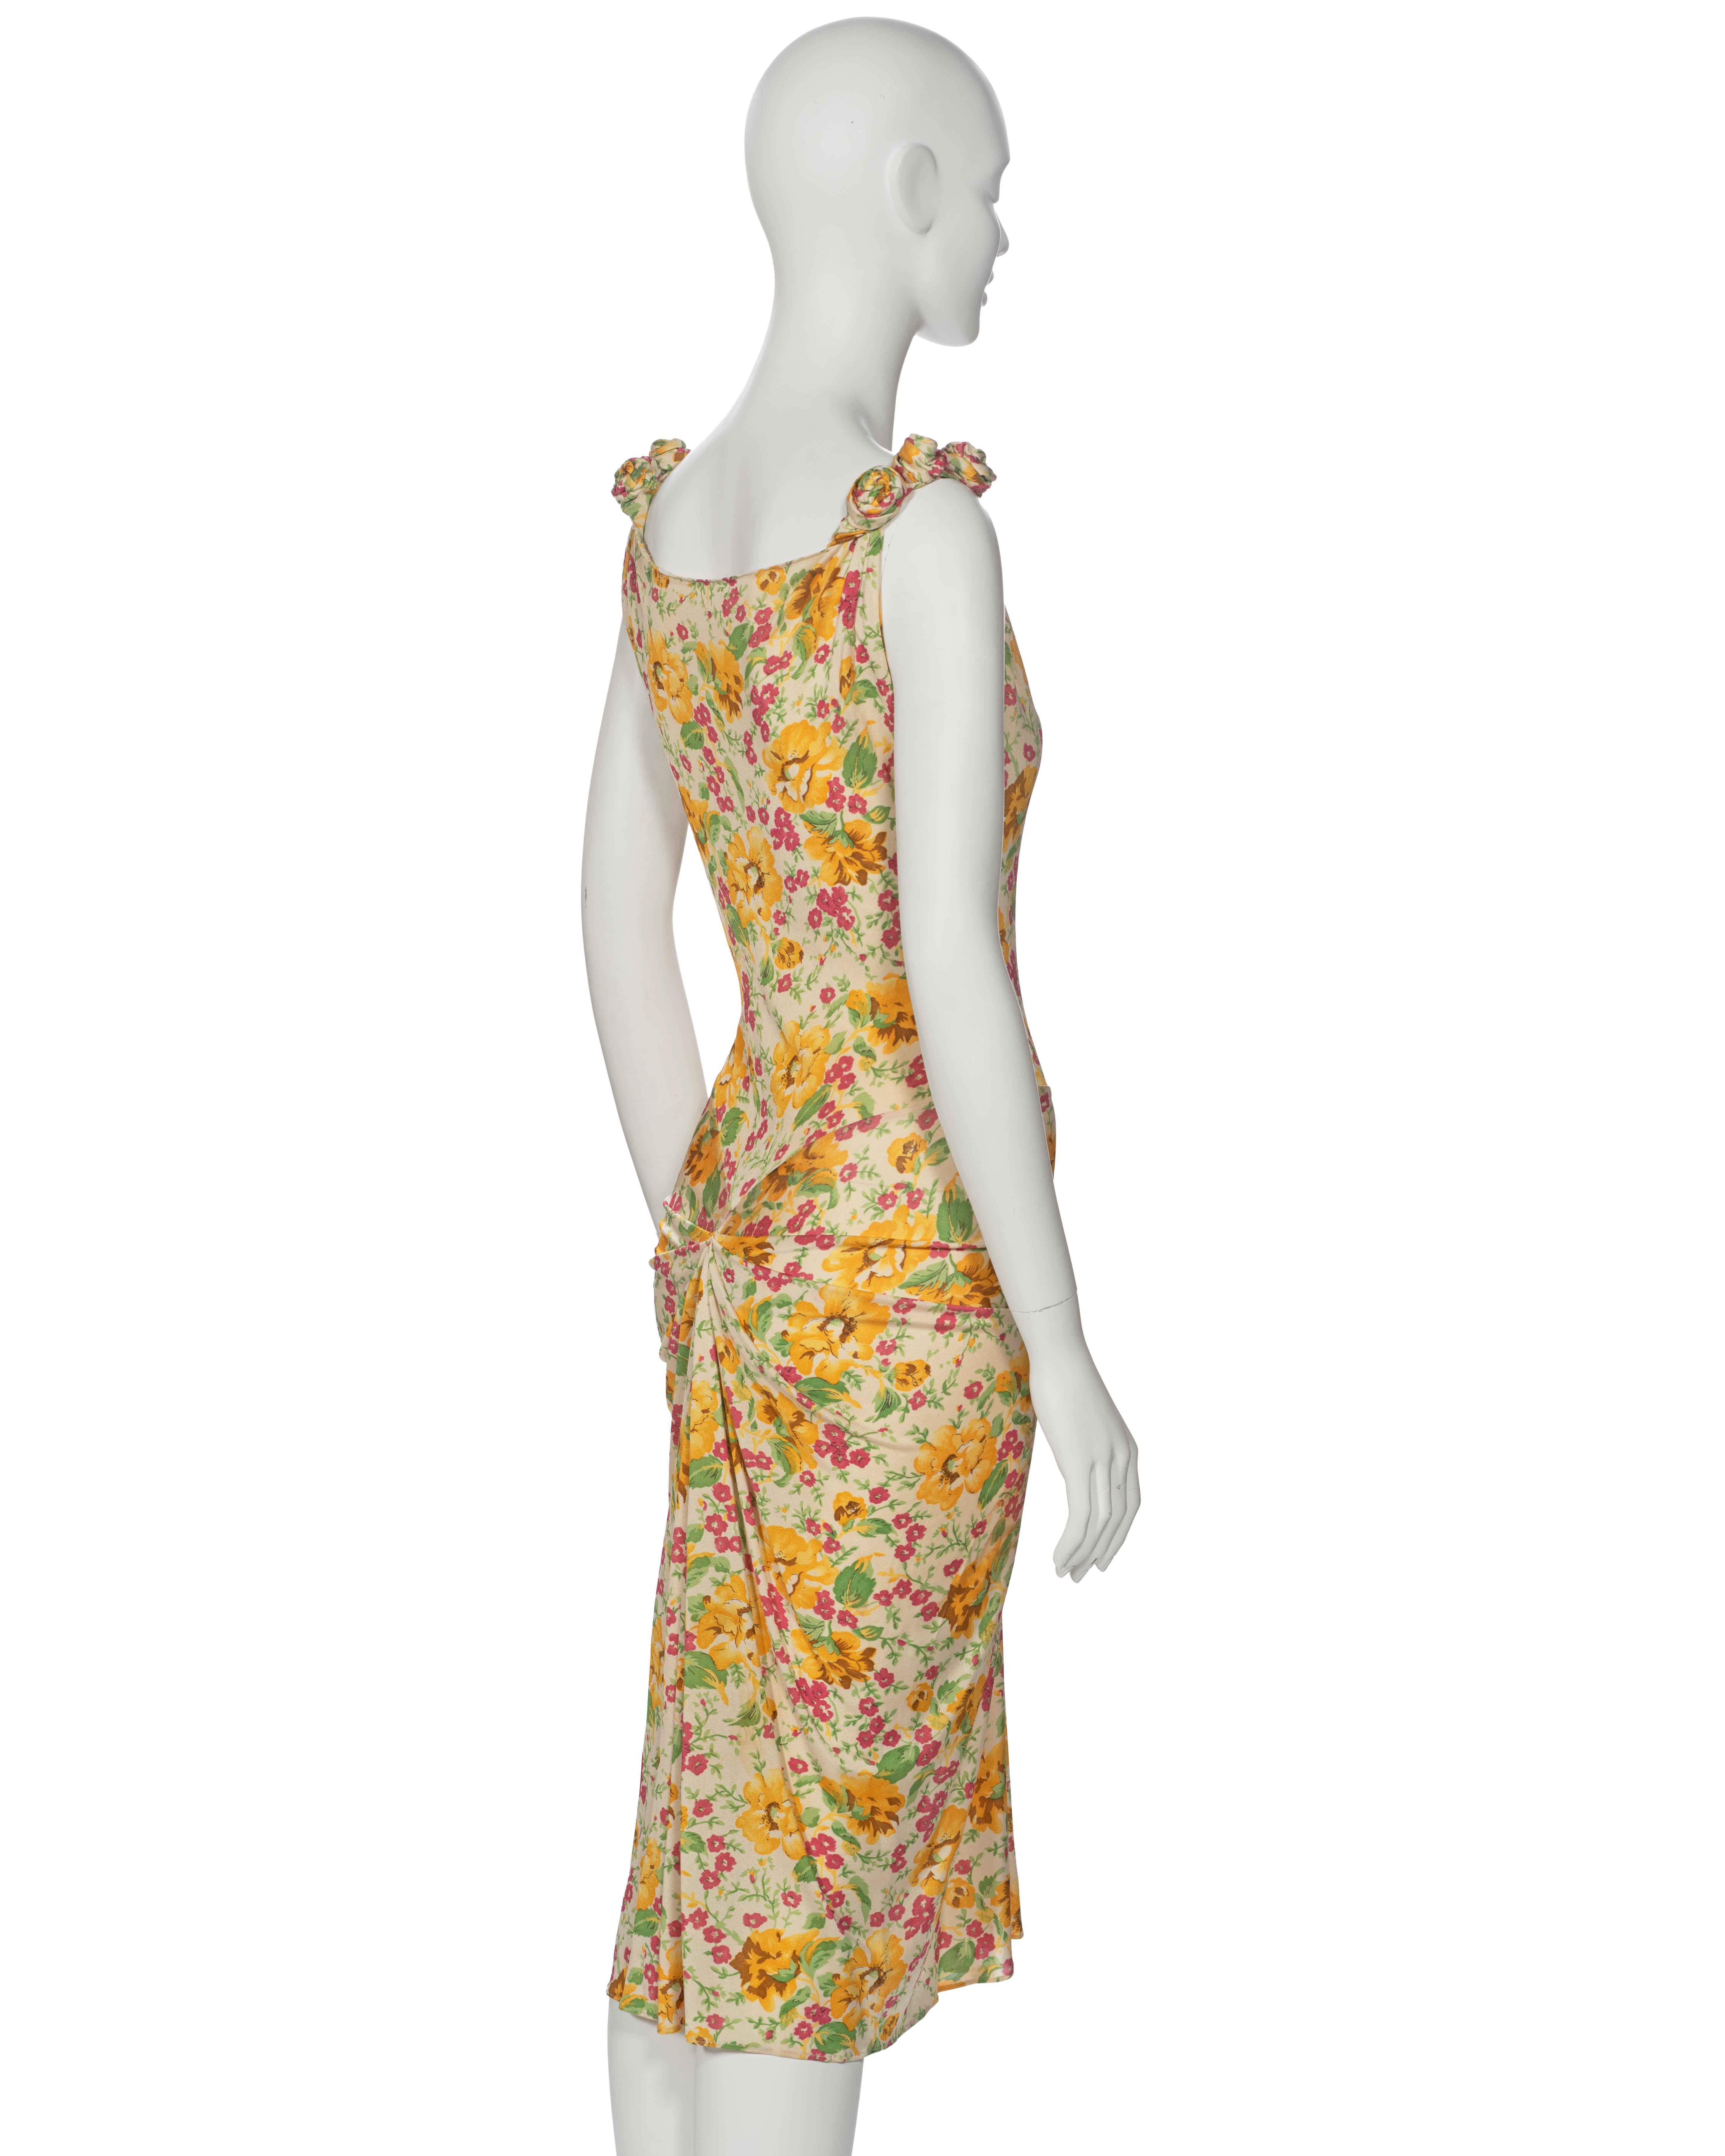 Christian Dior by John Galliano Floral Silk Jersey Cocktail Dress, ss 2000 4